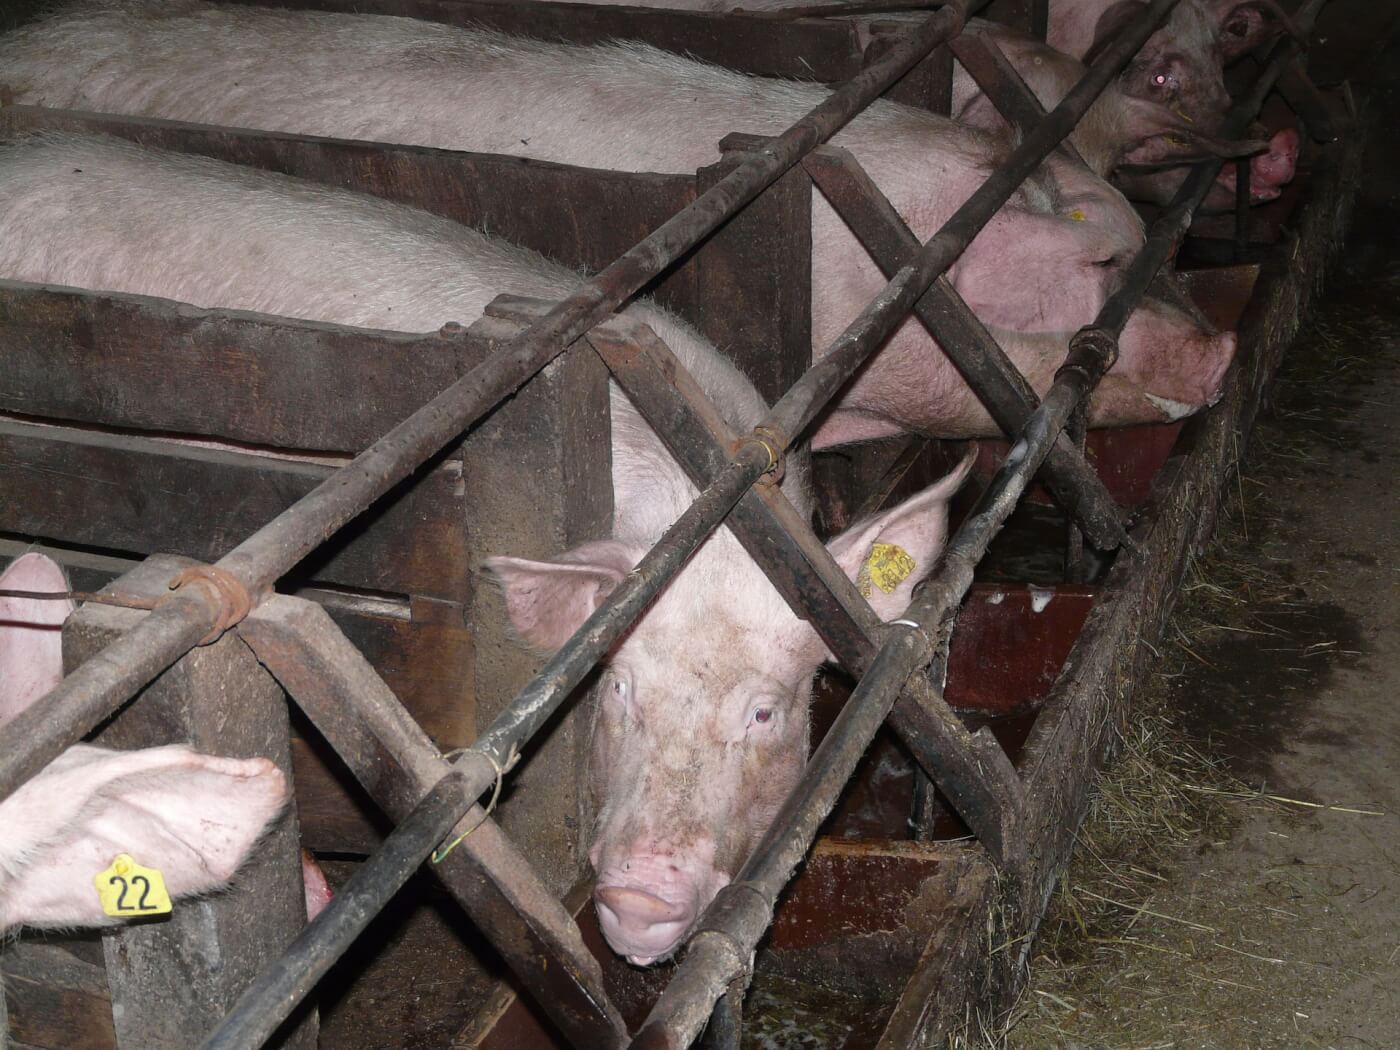 Uttar Pradesh Issues Directions Against Confining Mother Pigs to Crates, Following PETA India Appeal